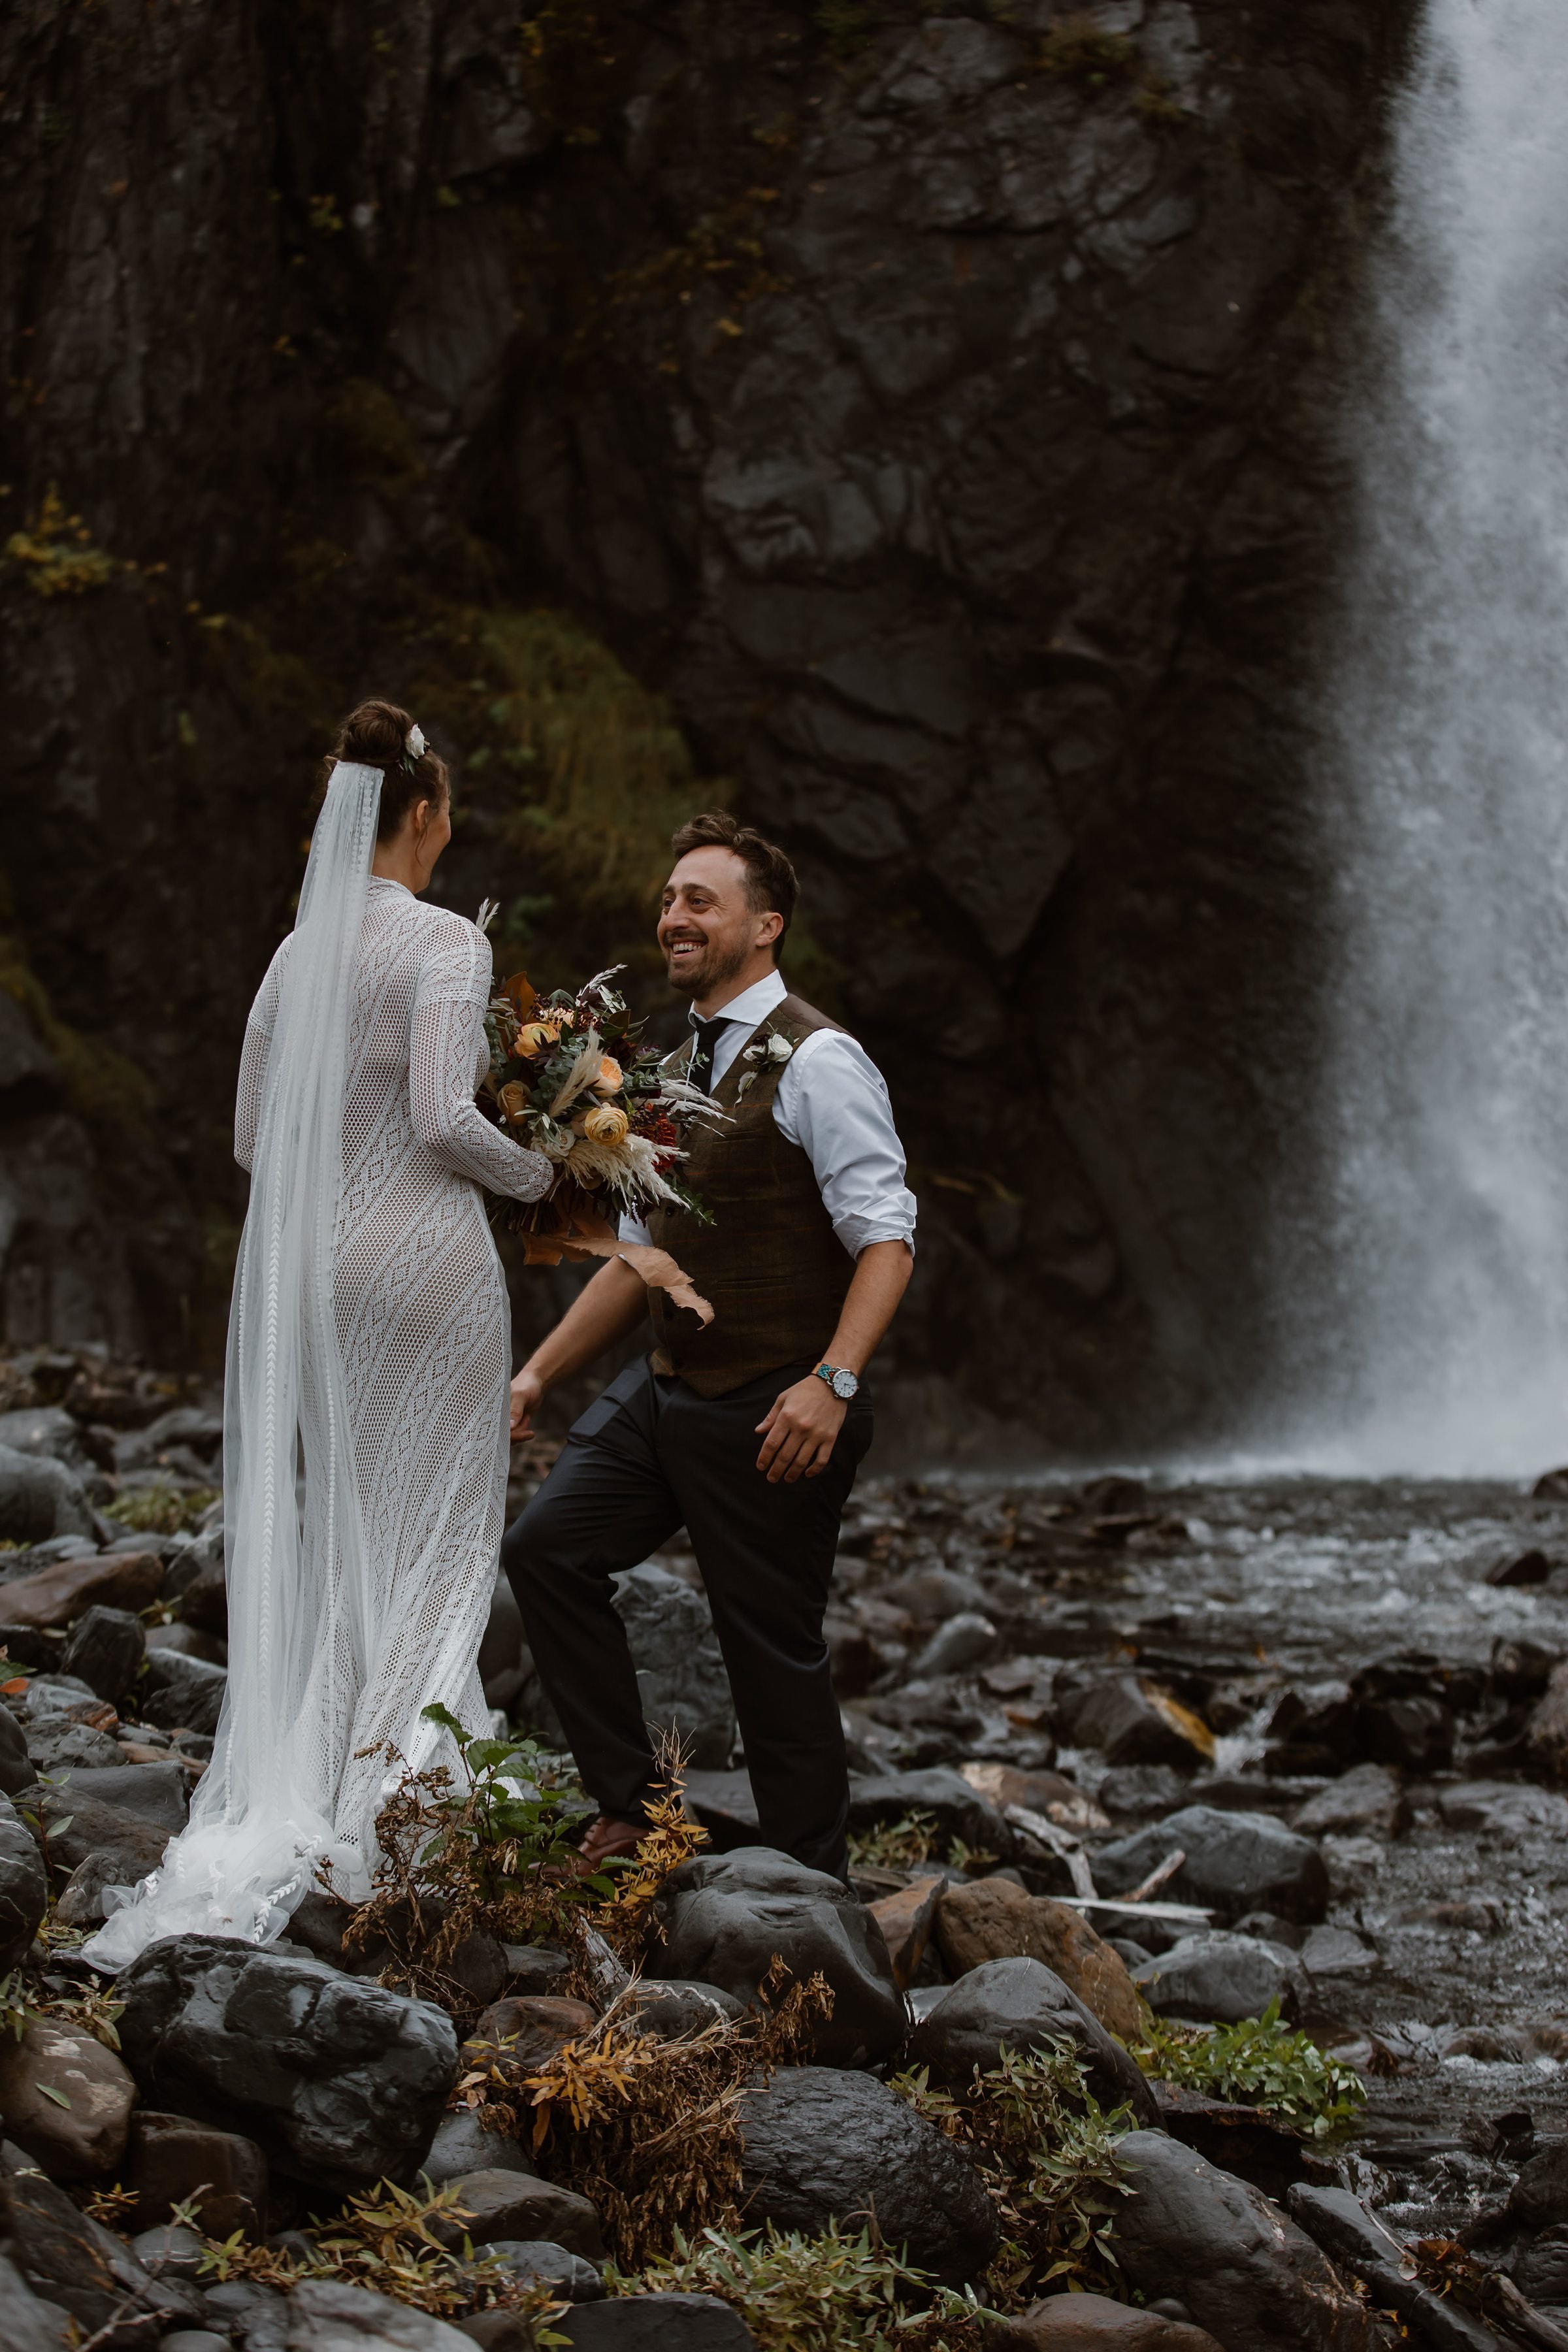  bride and groom first look by a waterfall 